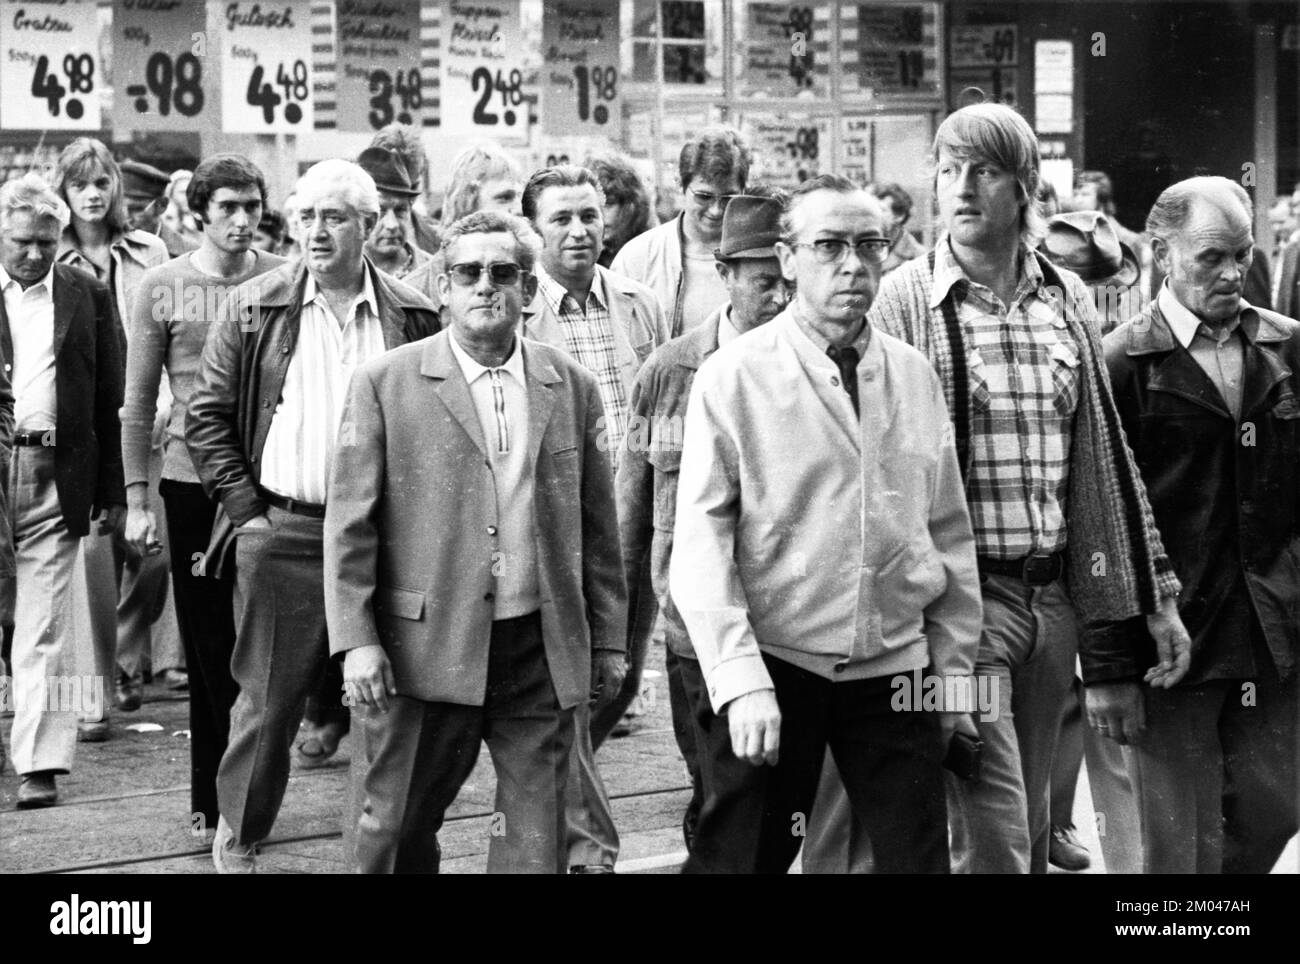 Workers of the Essen ironworks demonstrated against the reduction of social benefits after a works meeting in Essen, Germany, 24 September 1975, Europ Stock Photo